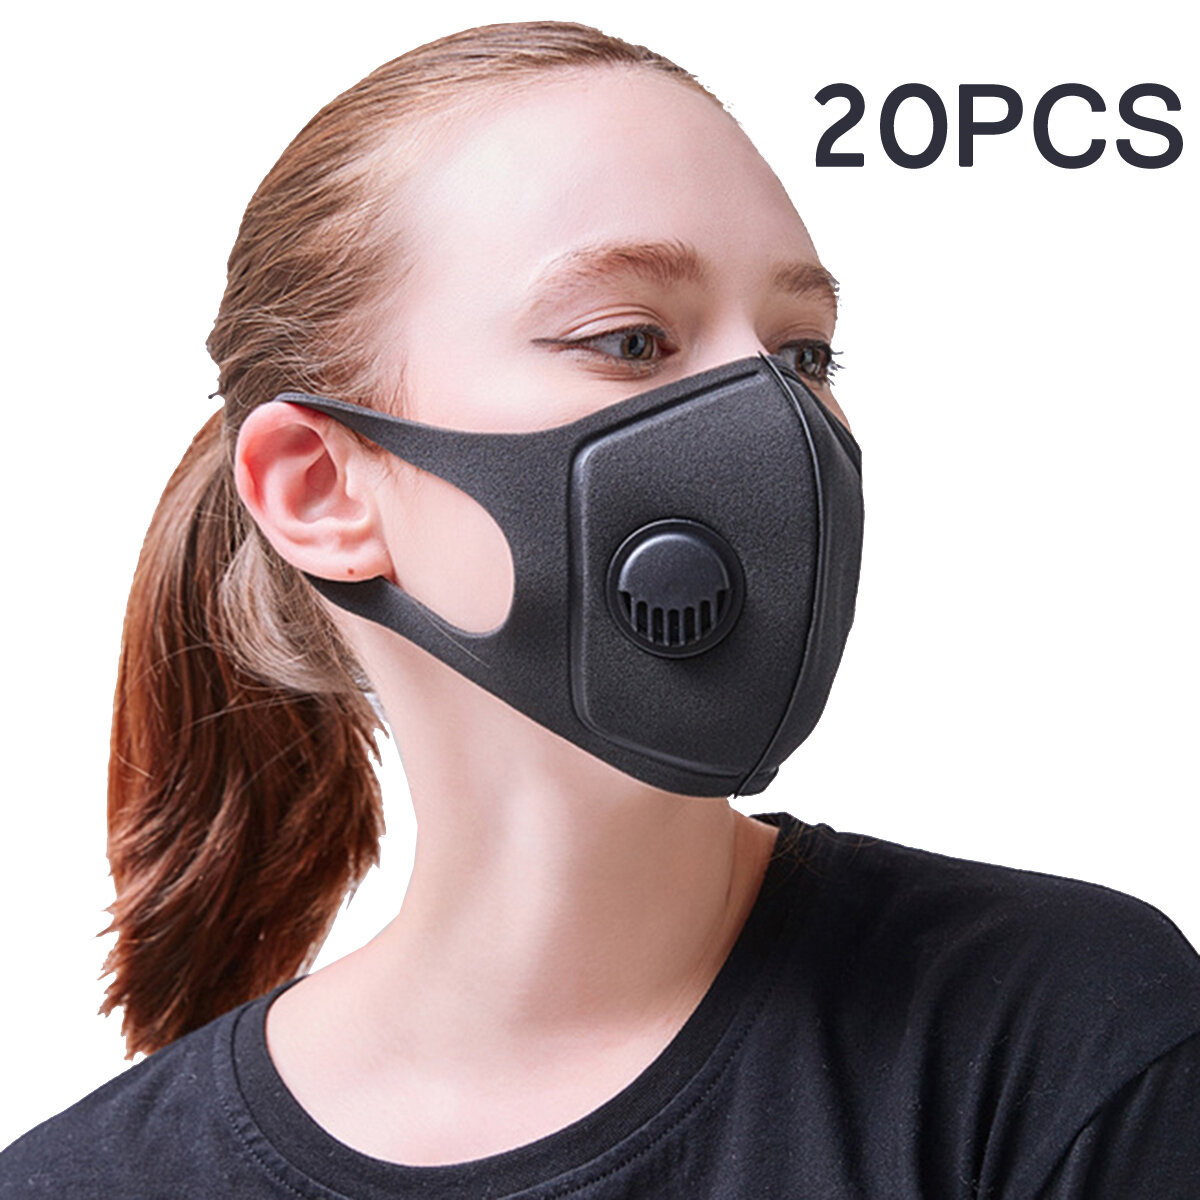 

20PCS PM2.5 Anti Air Pollution Face Mask Breathable Activated Carbon Mouth Mask Camping Travel Cycling Mask